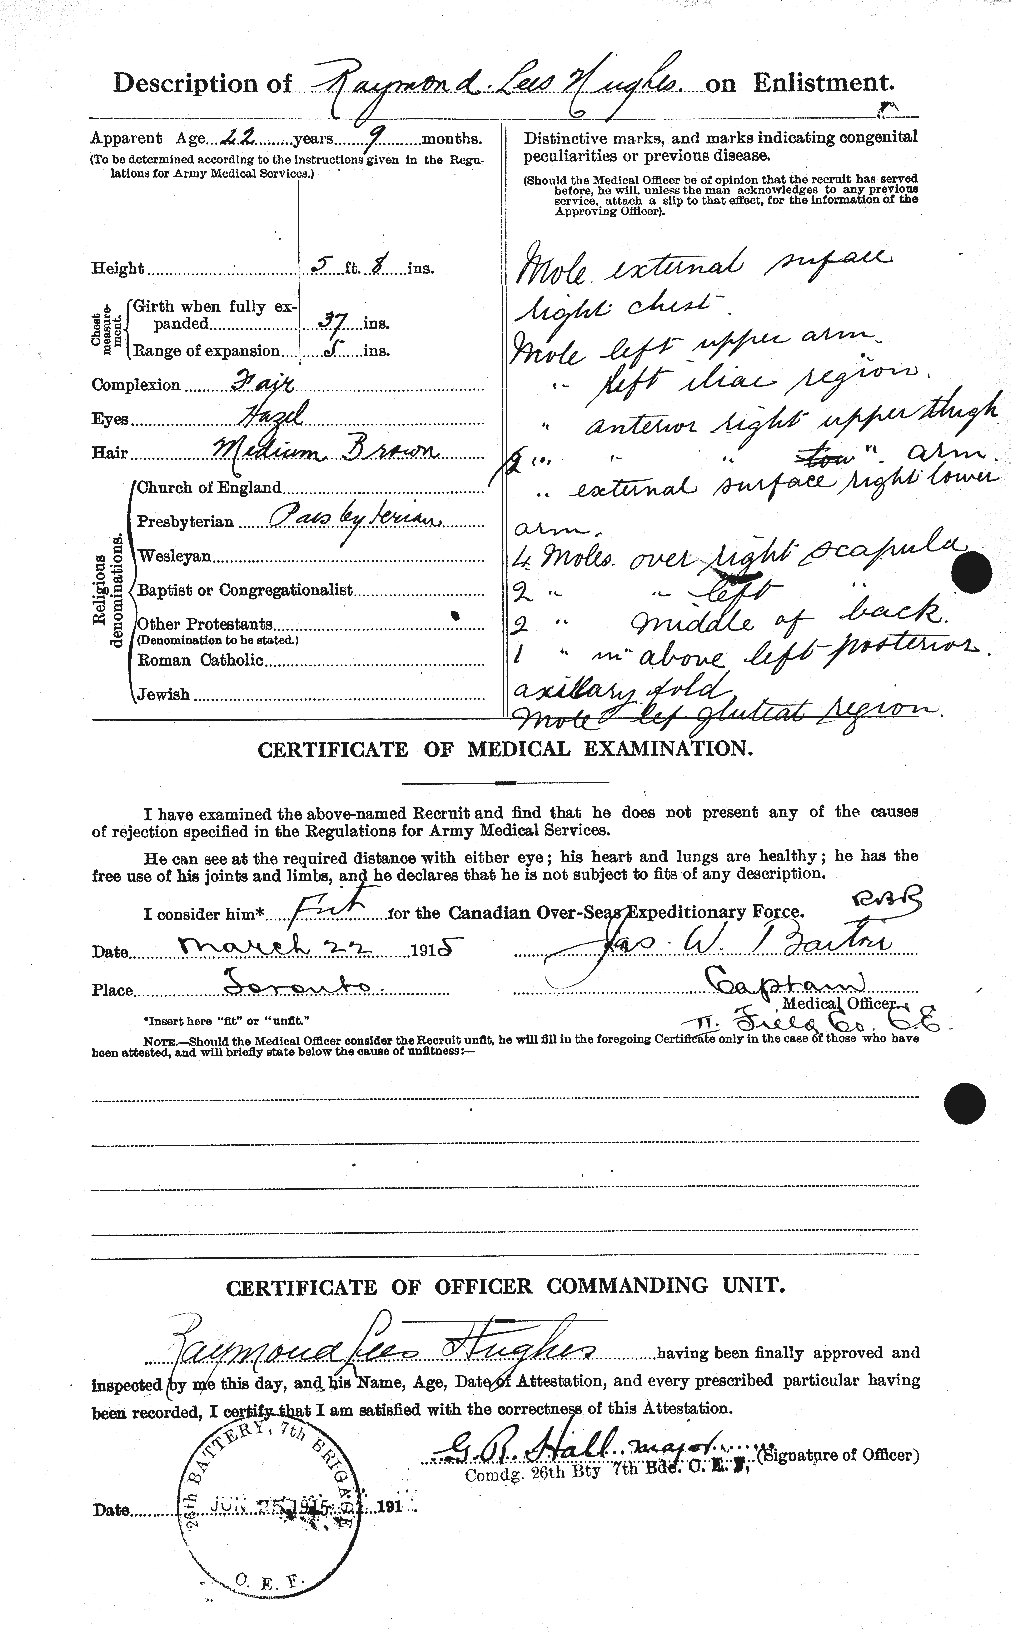 Personnel Records of the First World War - CEF 404173b